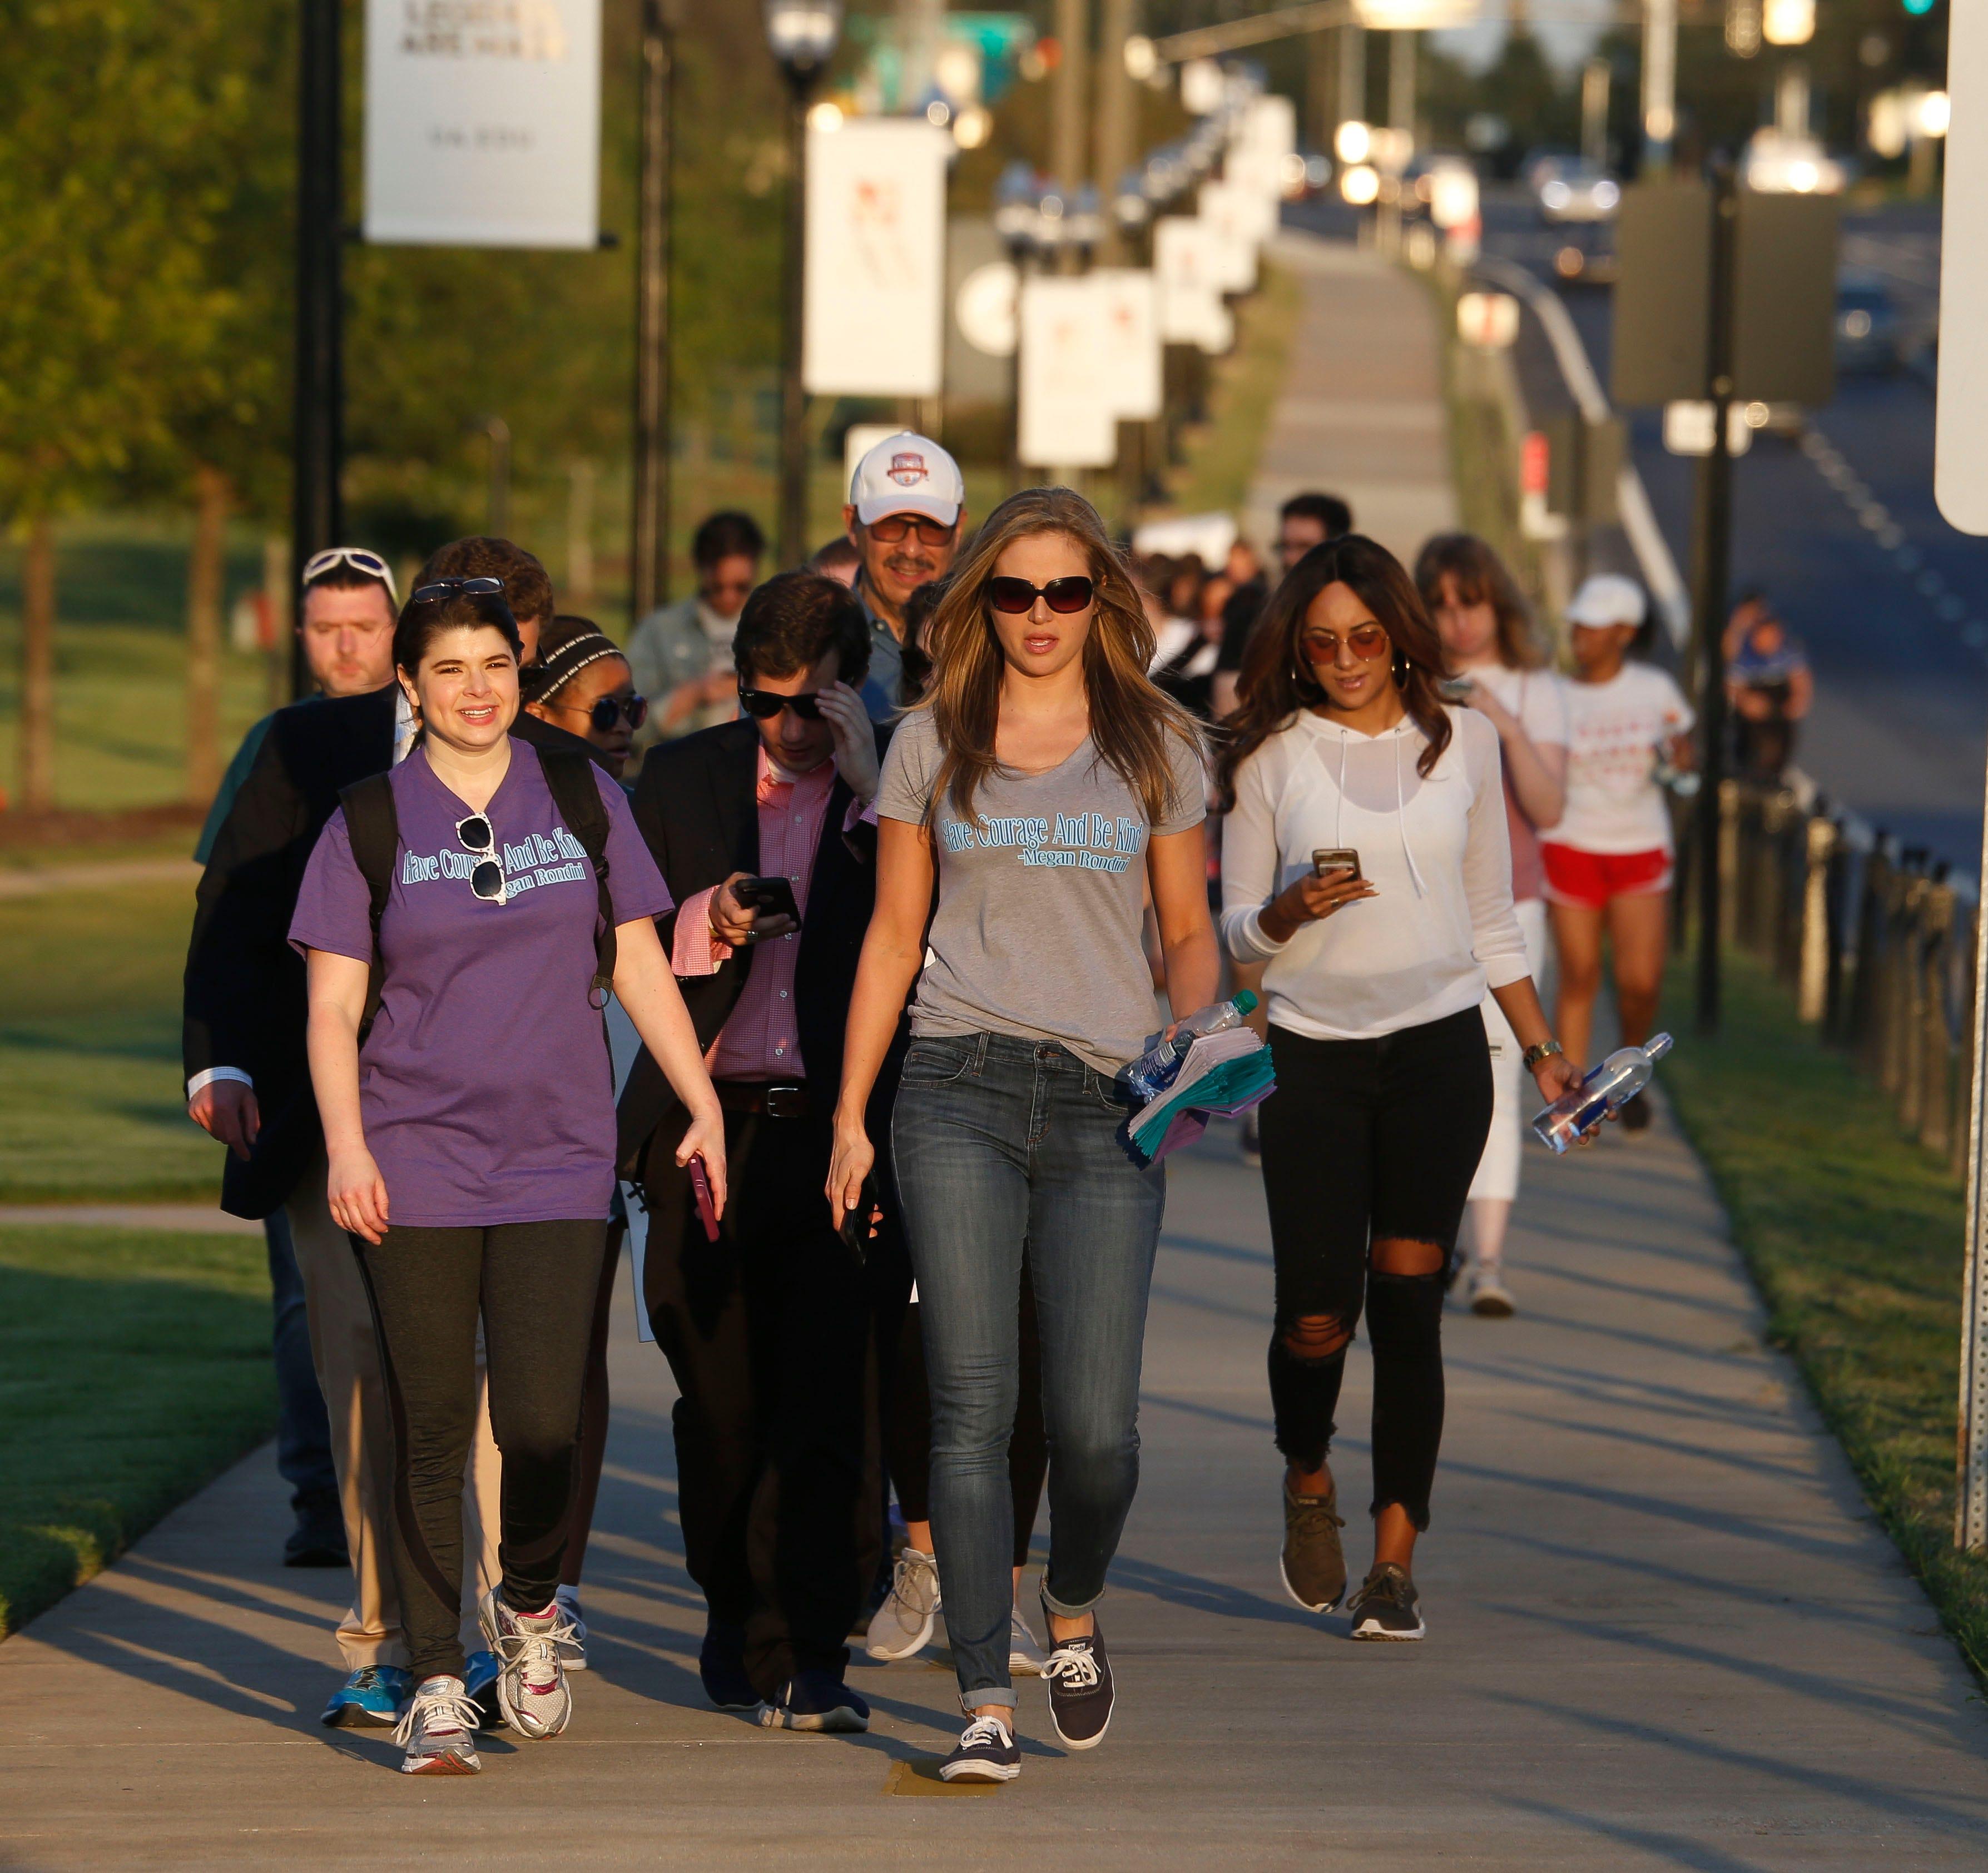 People gather and march in support of Megan Rondini along University Blvd. in Tuscaloosa Friday, September 8, 2017. [Staff Photo/Gary Cosby Jr.]